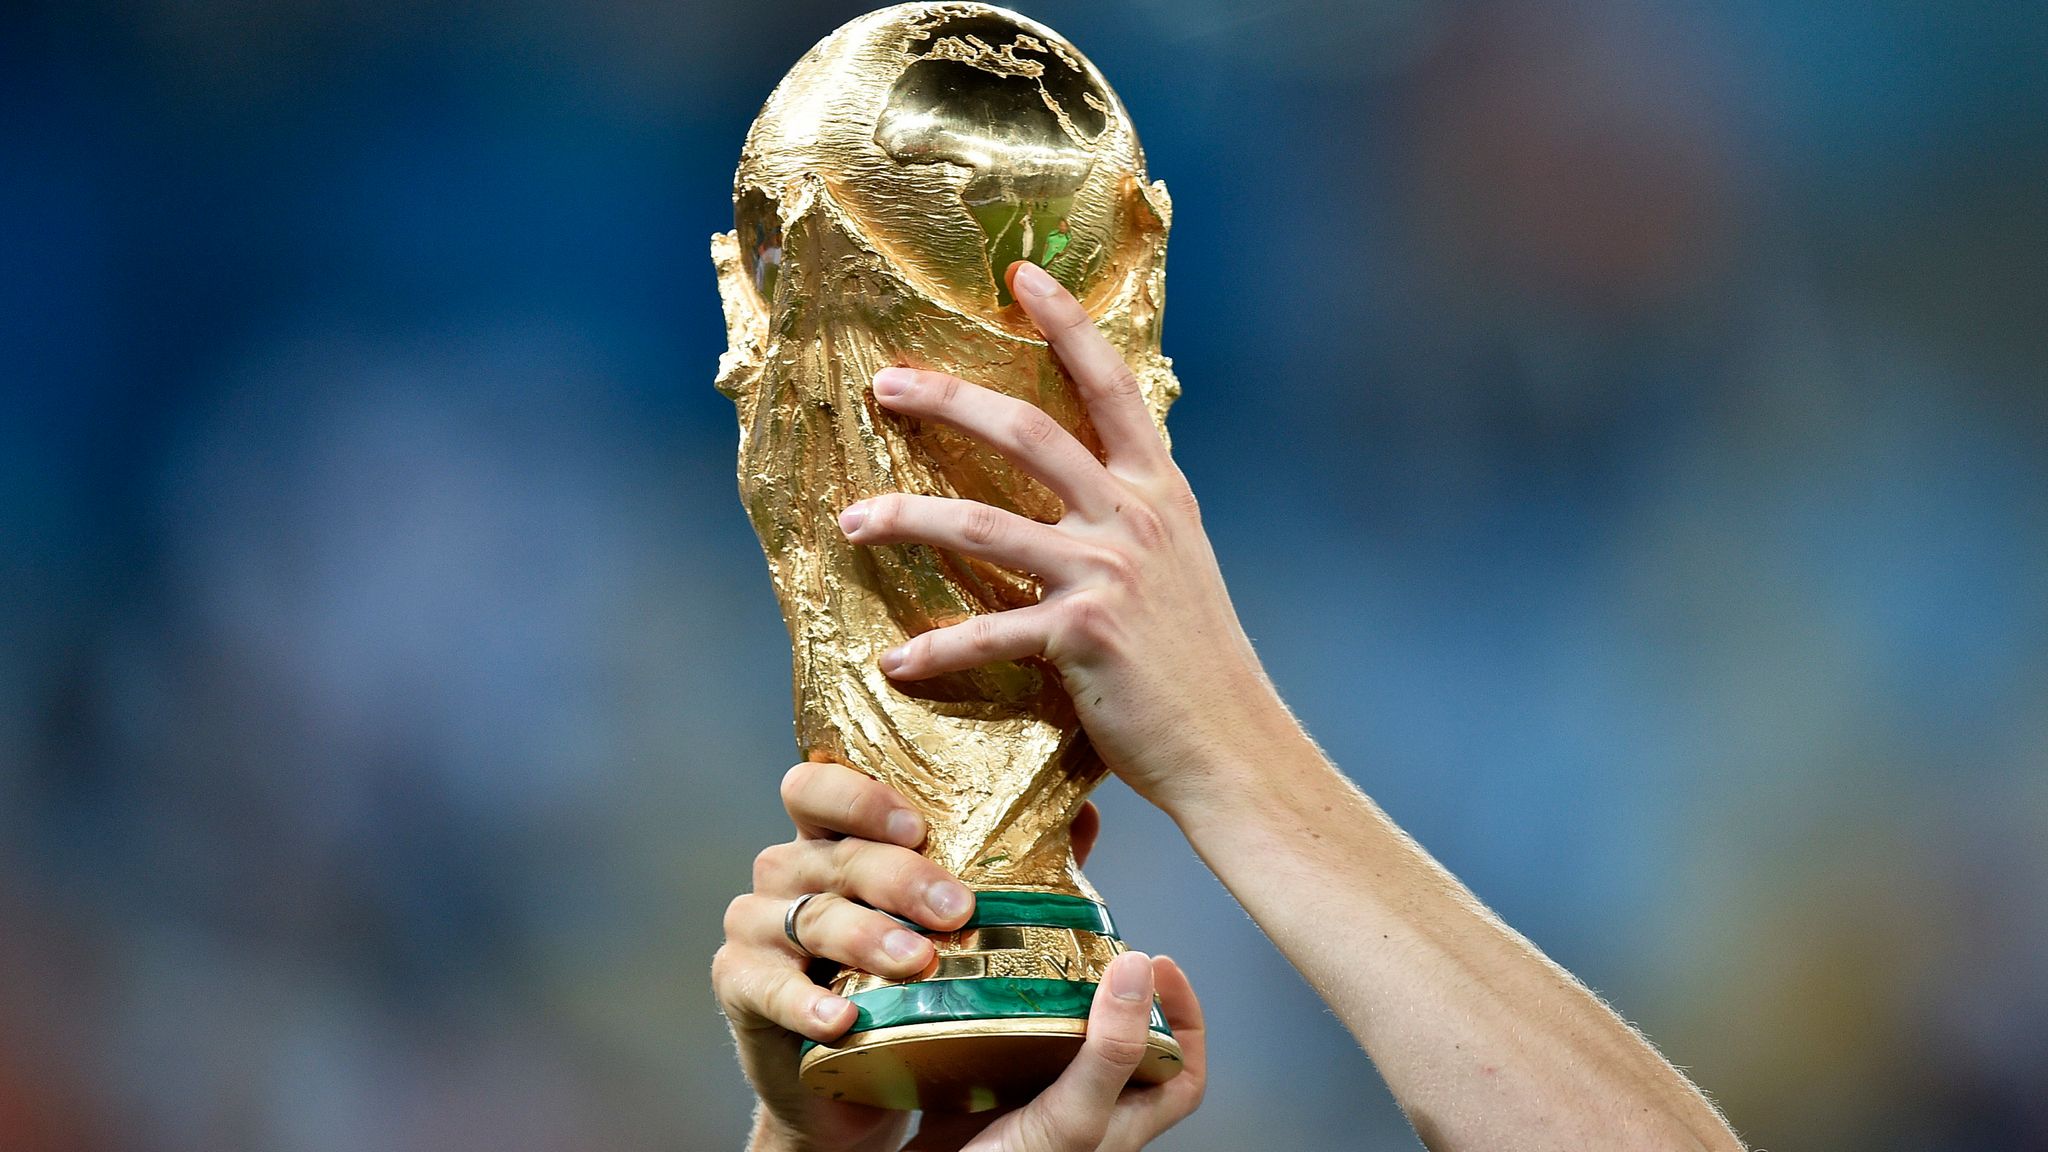 FIFA Proposes New Mini-World Cup Every Two Years